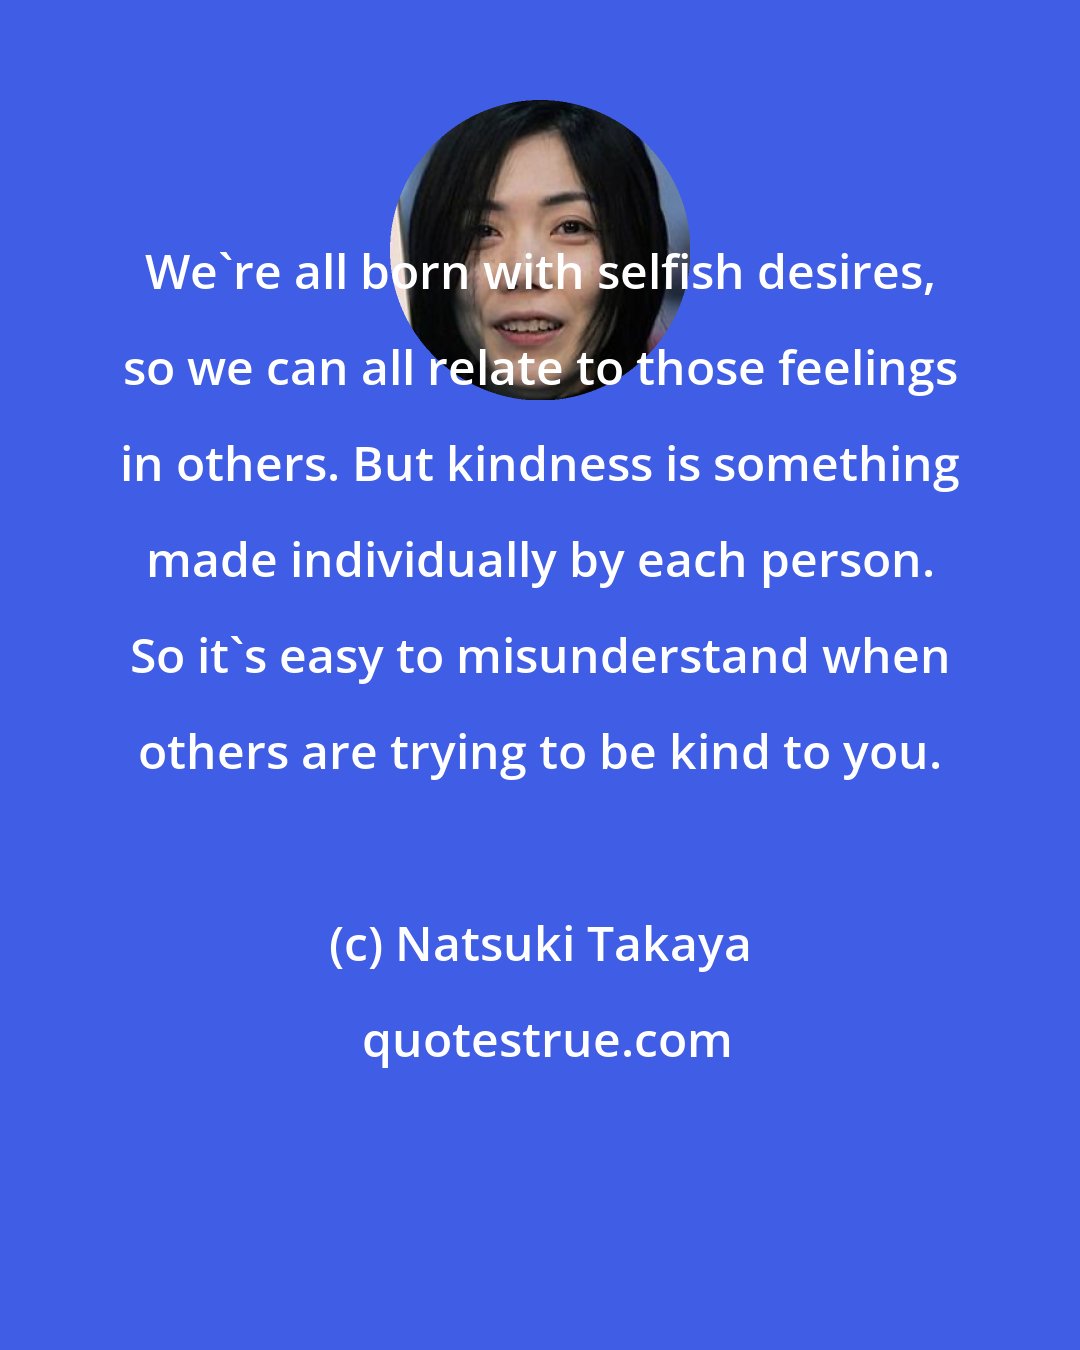 Natsuki Takaya: We're all born with selfish desires, so we can all relate to those feelings in others. But kindness is something made individually by each person. So it's easy to misunderstand when others are trying to be kind to you.